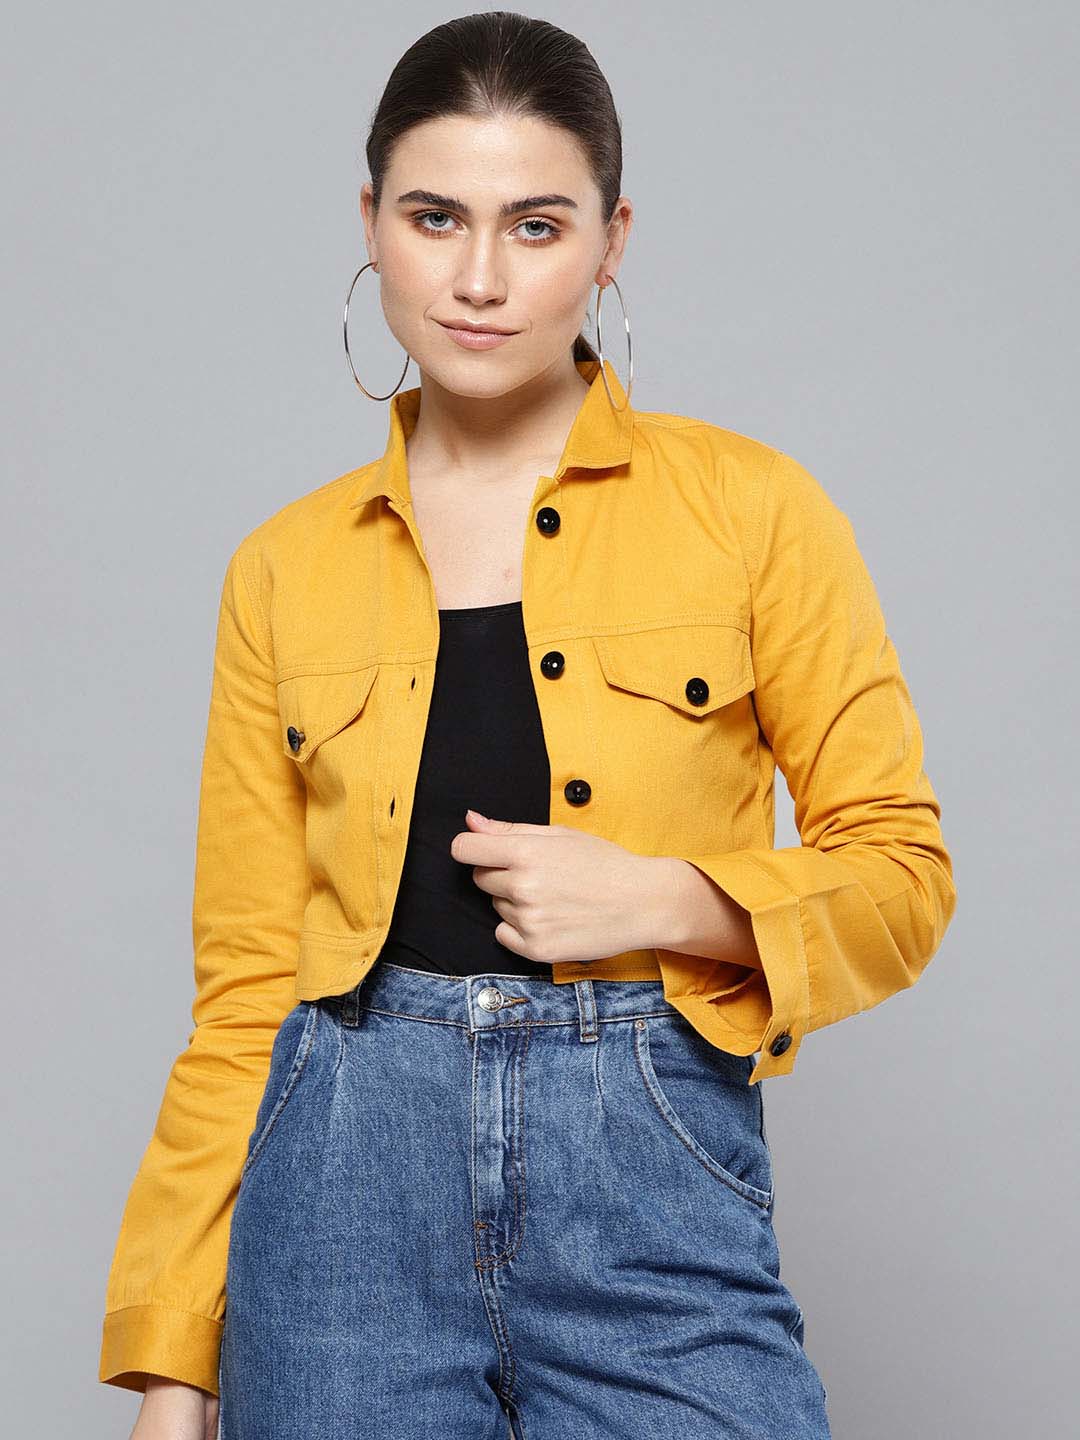 Buy Women's Denim Jacket Solid Color Long Sleeve Jean Coat High Waist  Button Down Trucker Outerwear with Pockets, Yellow, XX-Large at Amazon.in